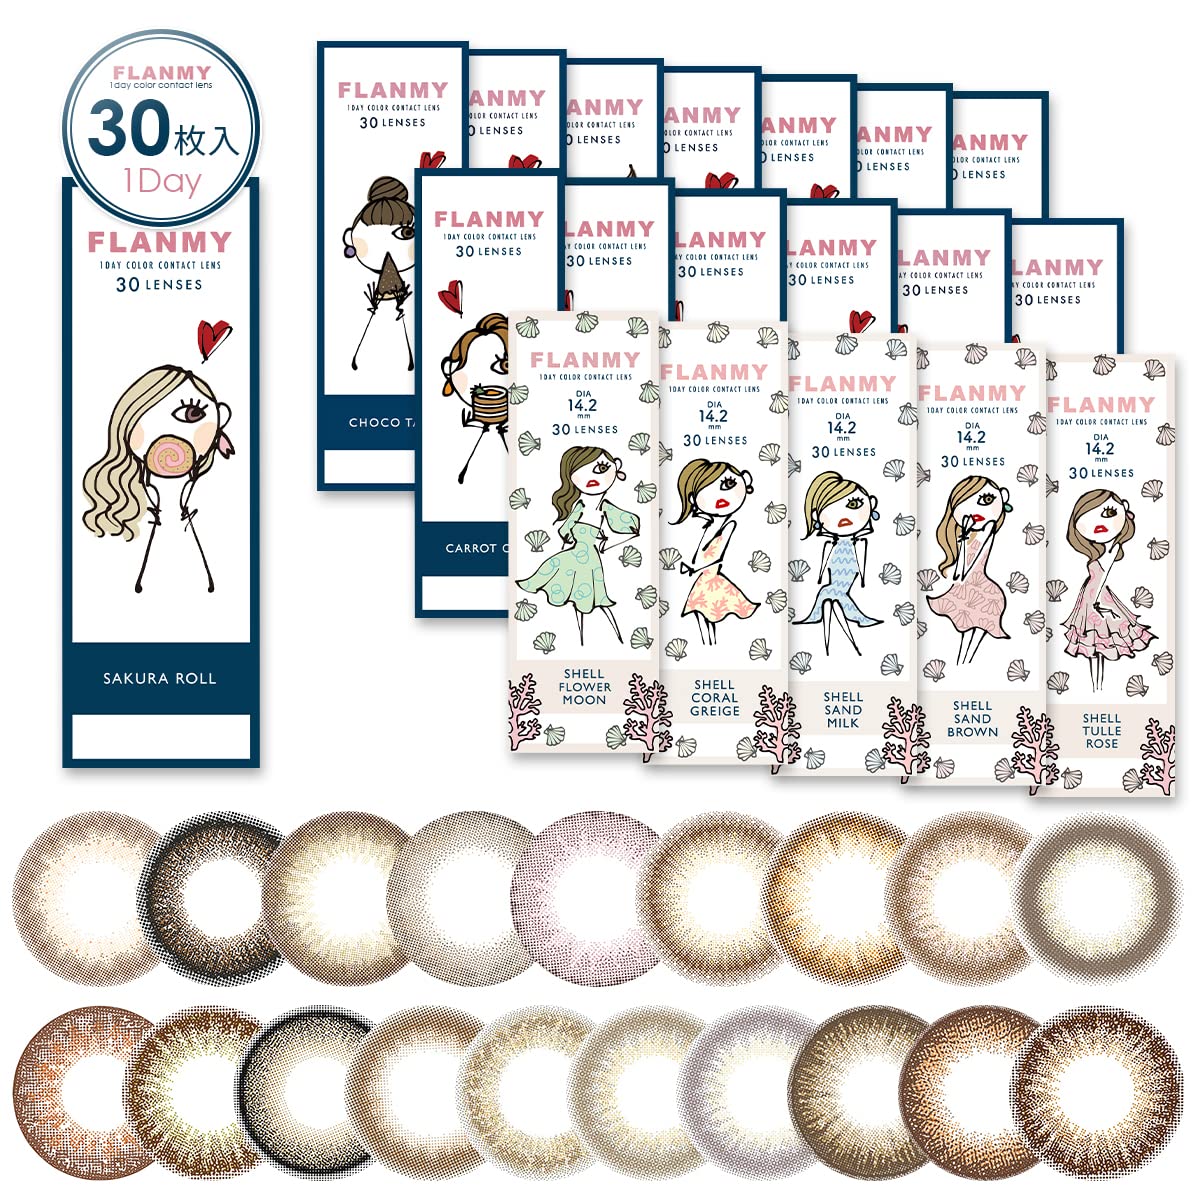 Flanmy 1Day Color Contacts -02.00 Pwr [30 Per Box] Maple Chiffon - Made In Japan